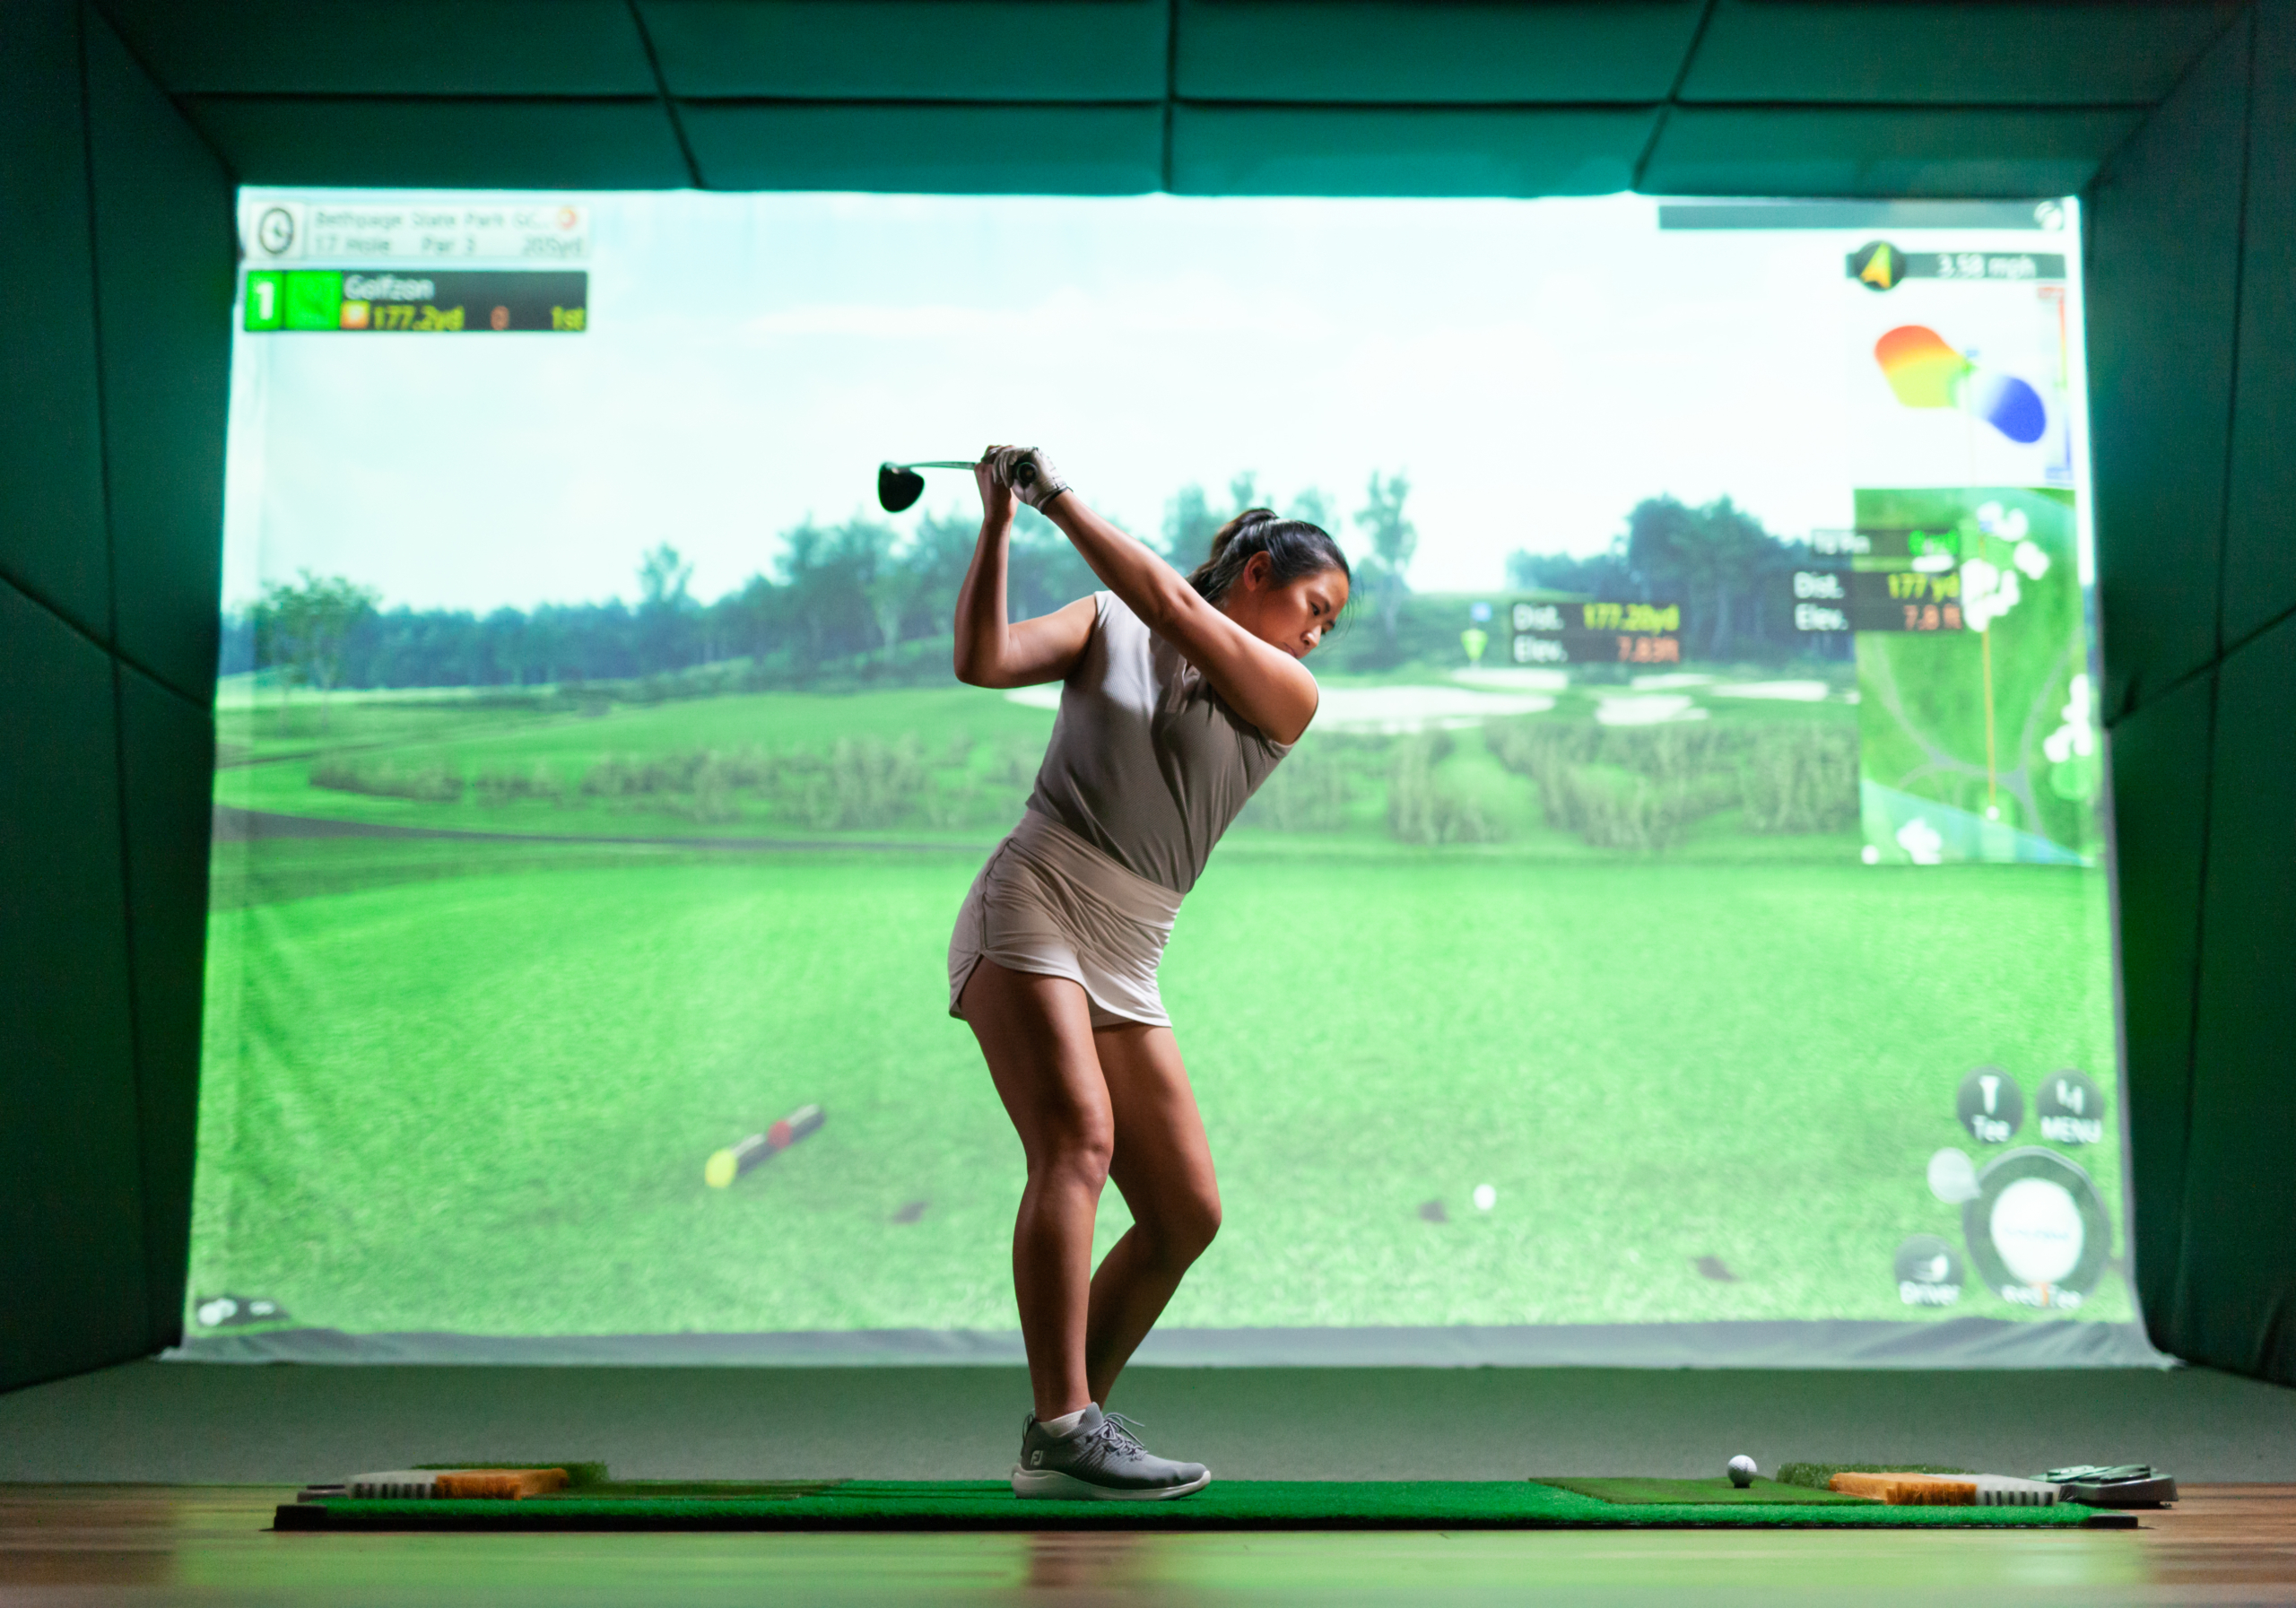 Lidl launches new golf range – yes, really!